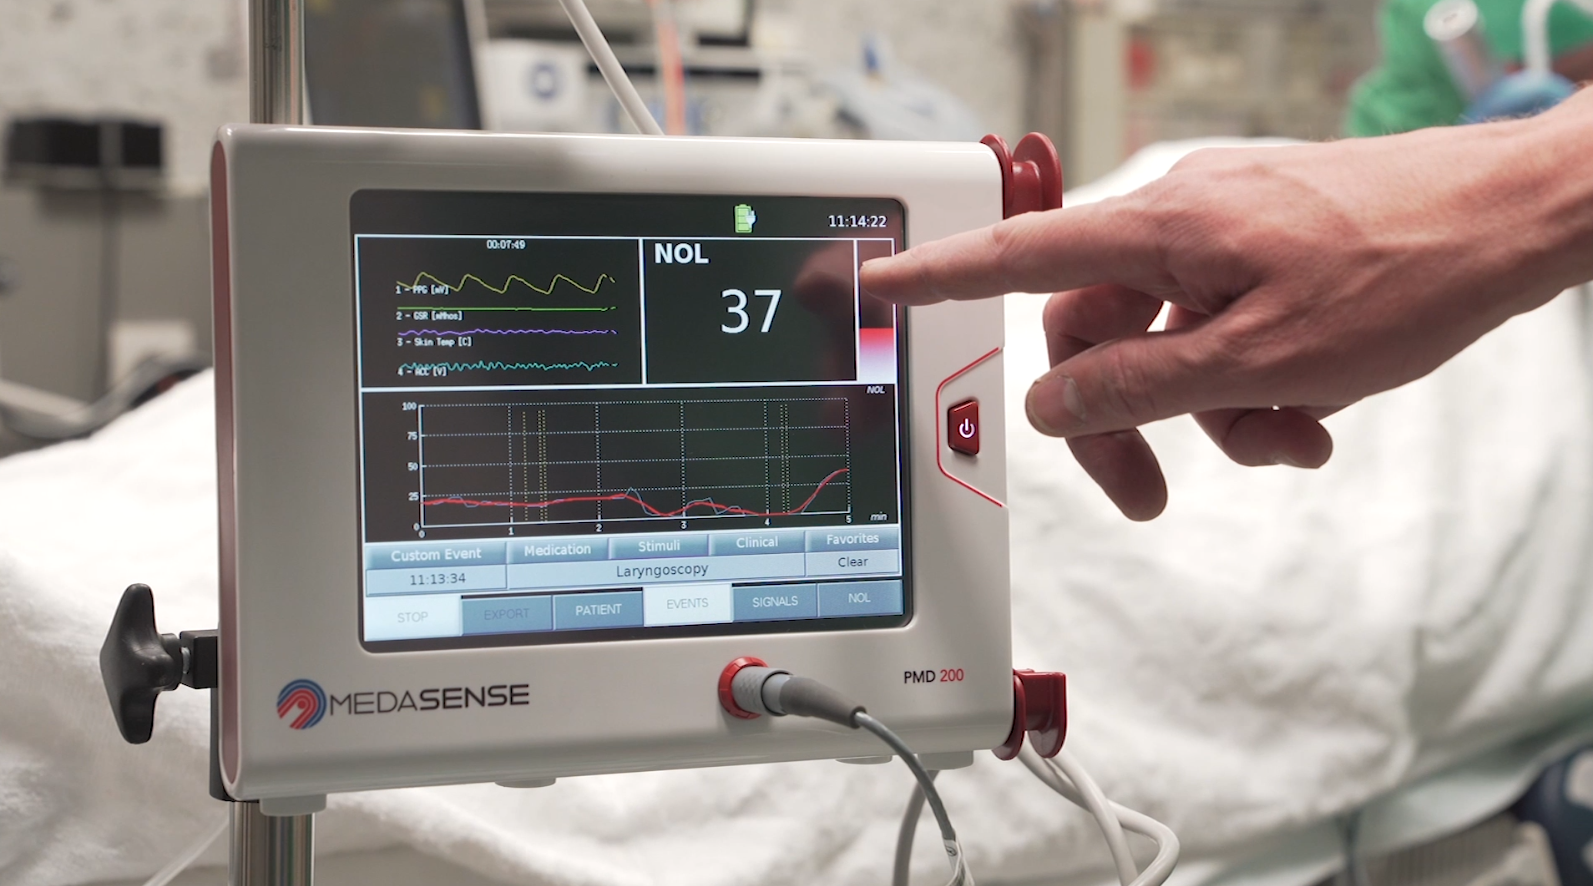 Medasense’s PMD-200 device monitors and quantifies patients’ pain response using artificial intelligence and a proprietary noninvasive sensor platform. Photo: courtesy